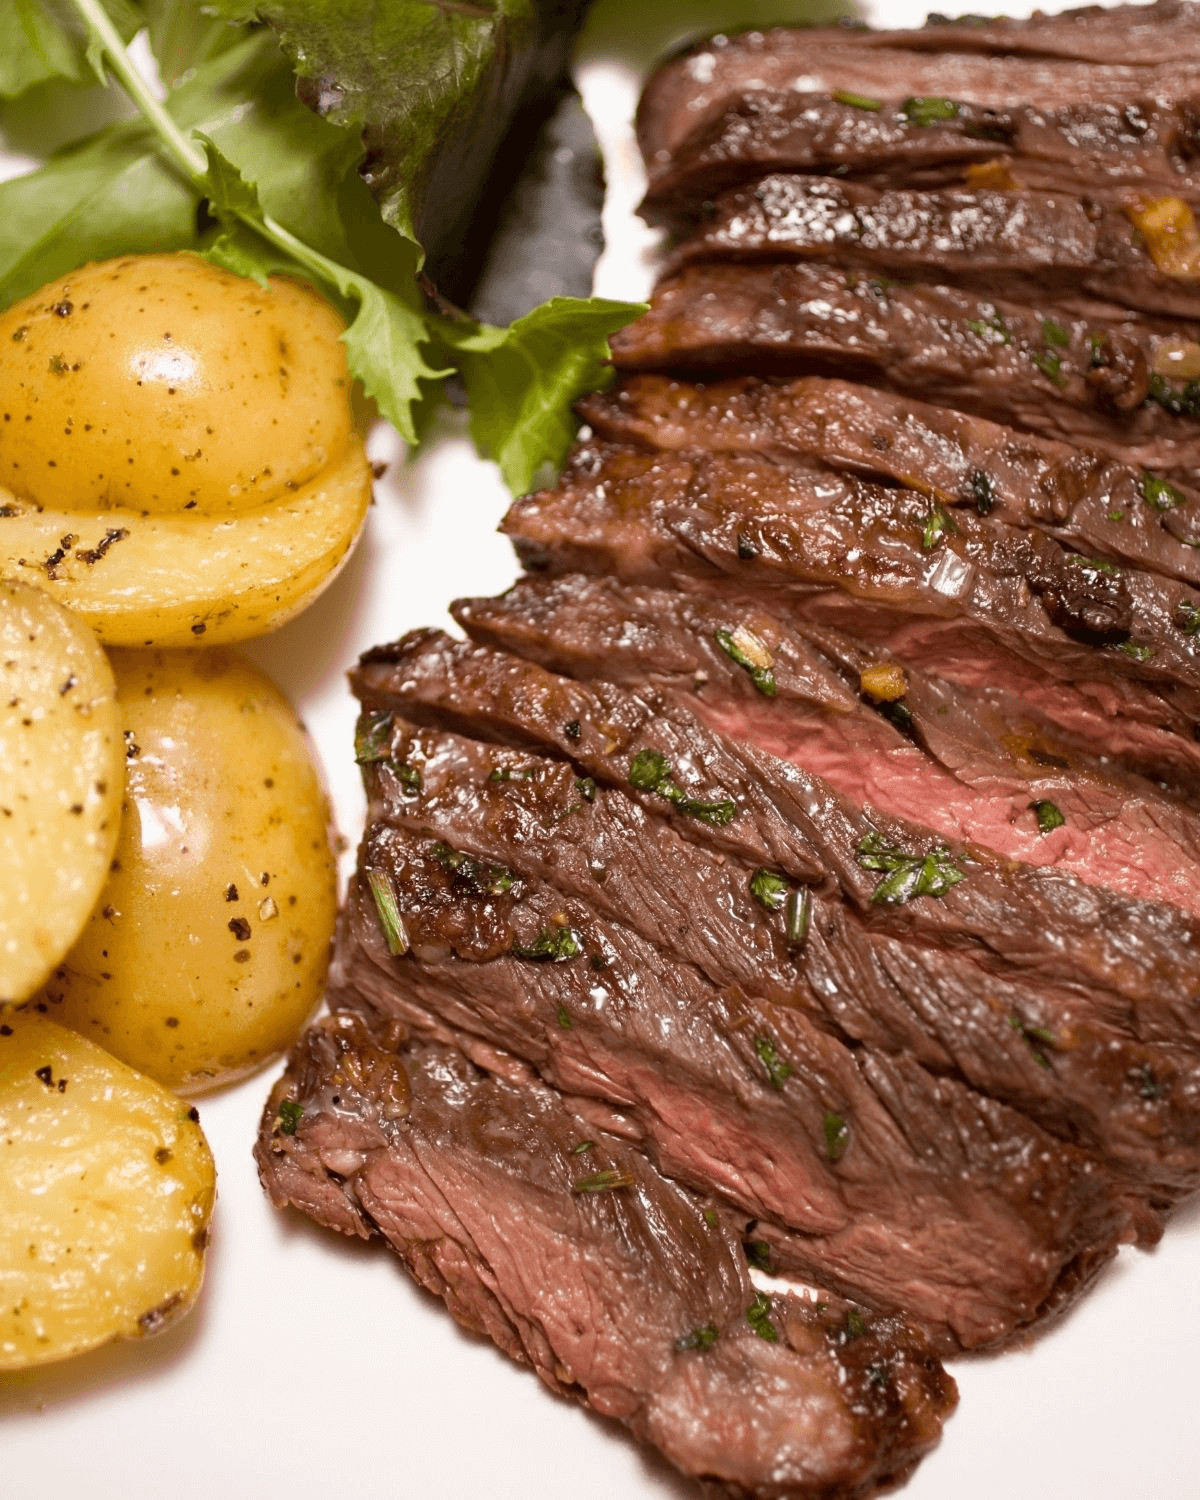 Sliced grilled skirt steak with herbs, served alongside boiled potatoes and a green salad, presented on a white plate.